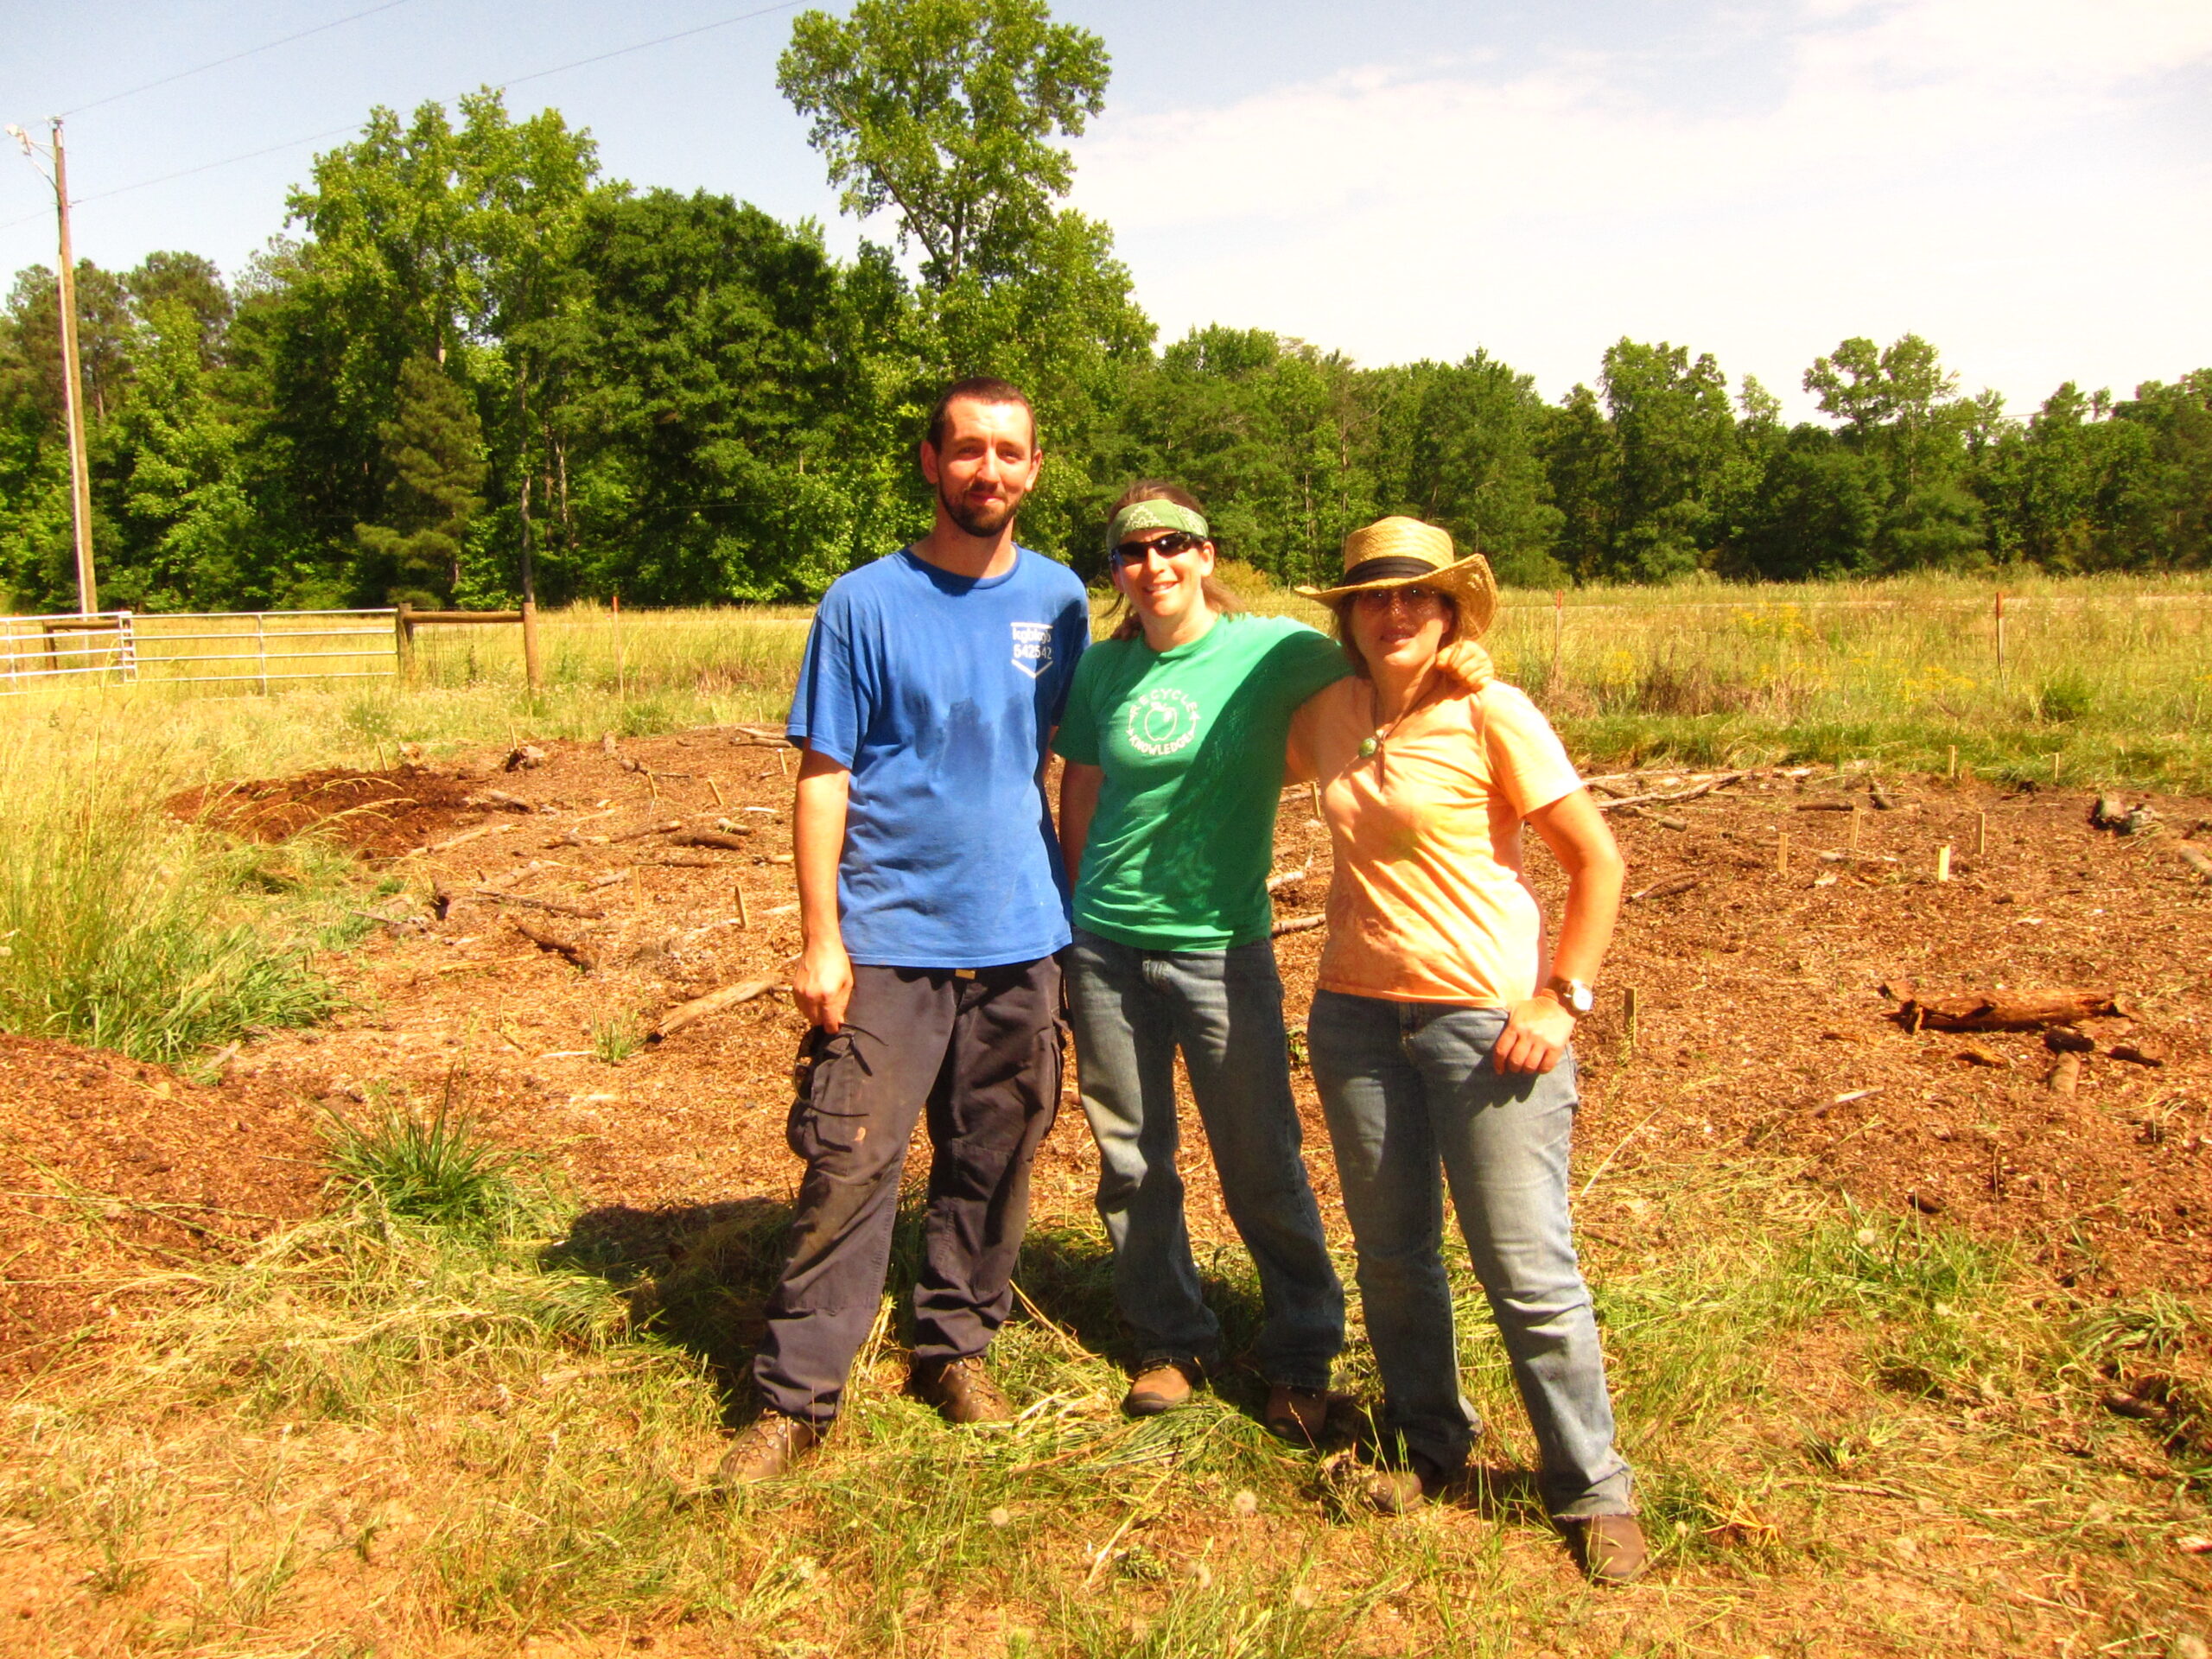 Jeff Killingsorth, Lauren Sandoval and Pandra Williams pose in an open field in June of 2010. Behind them is exposed soil which will be amended to create sunbeds at the Lexington farm.